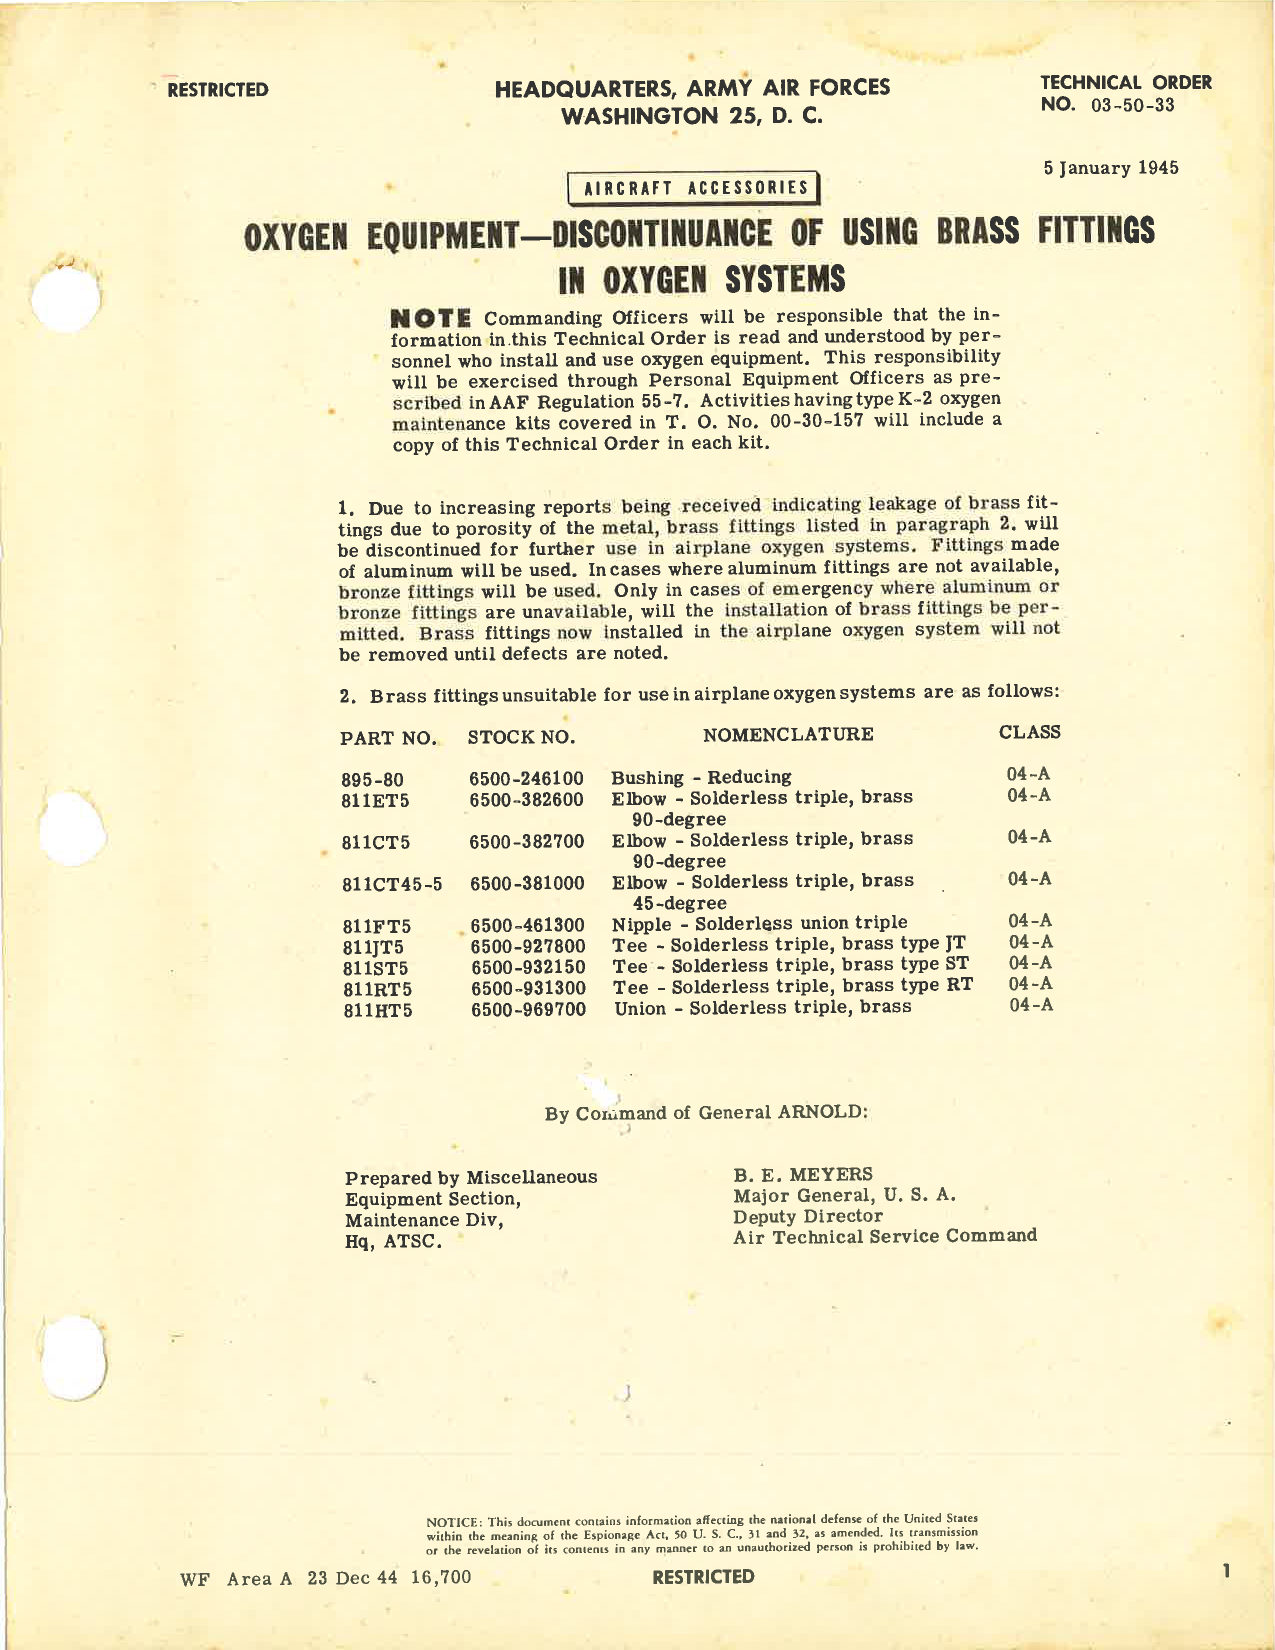 Sample page 1 from AirCorps Library document: Aircraft Accessories; Oxygen Equipment for Discontinuance of Using Brass Fittings in Oxygen Systems